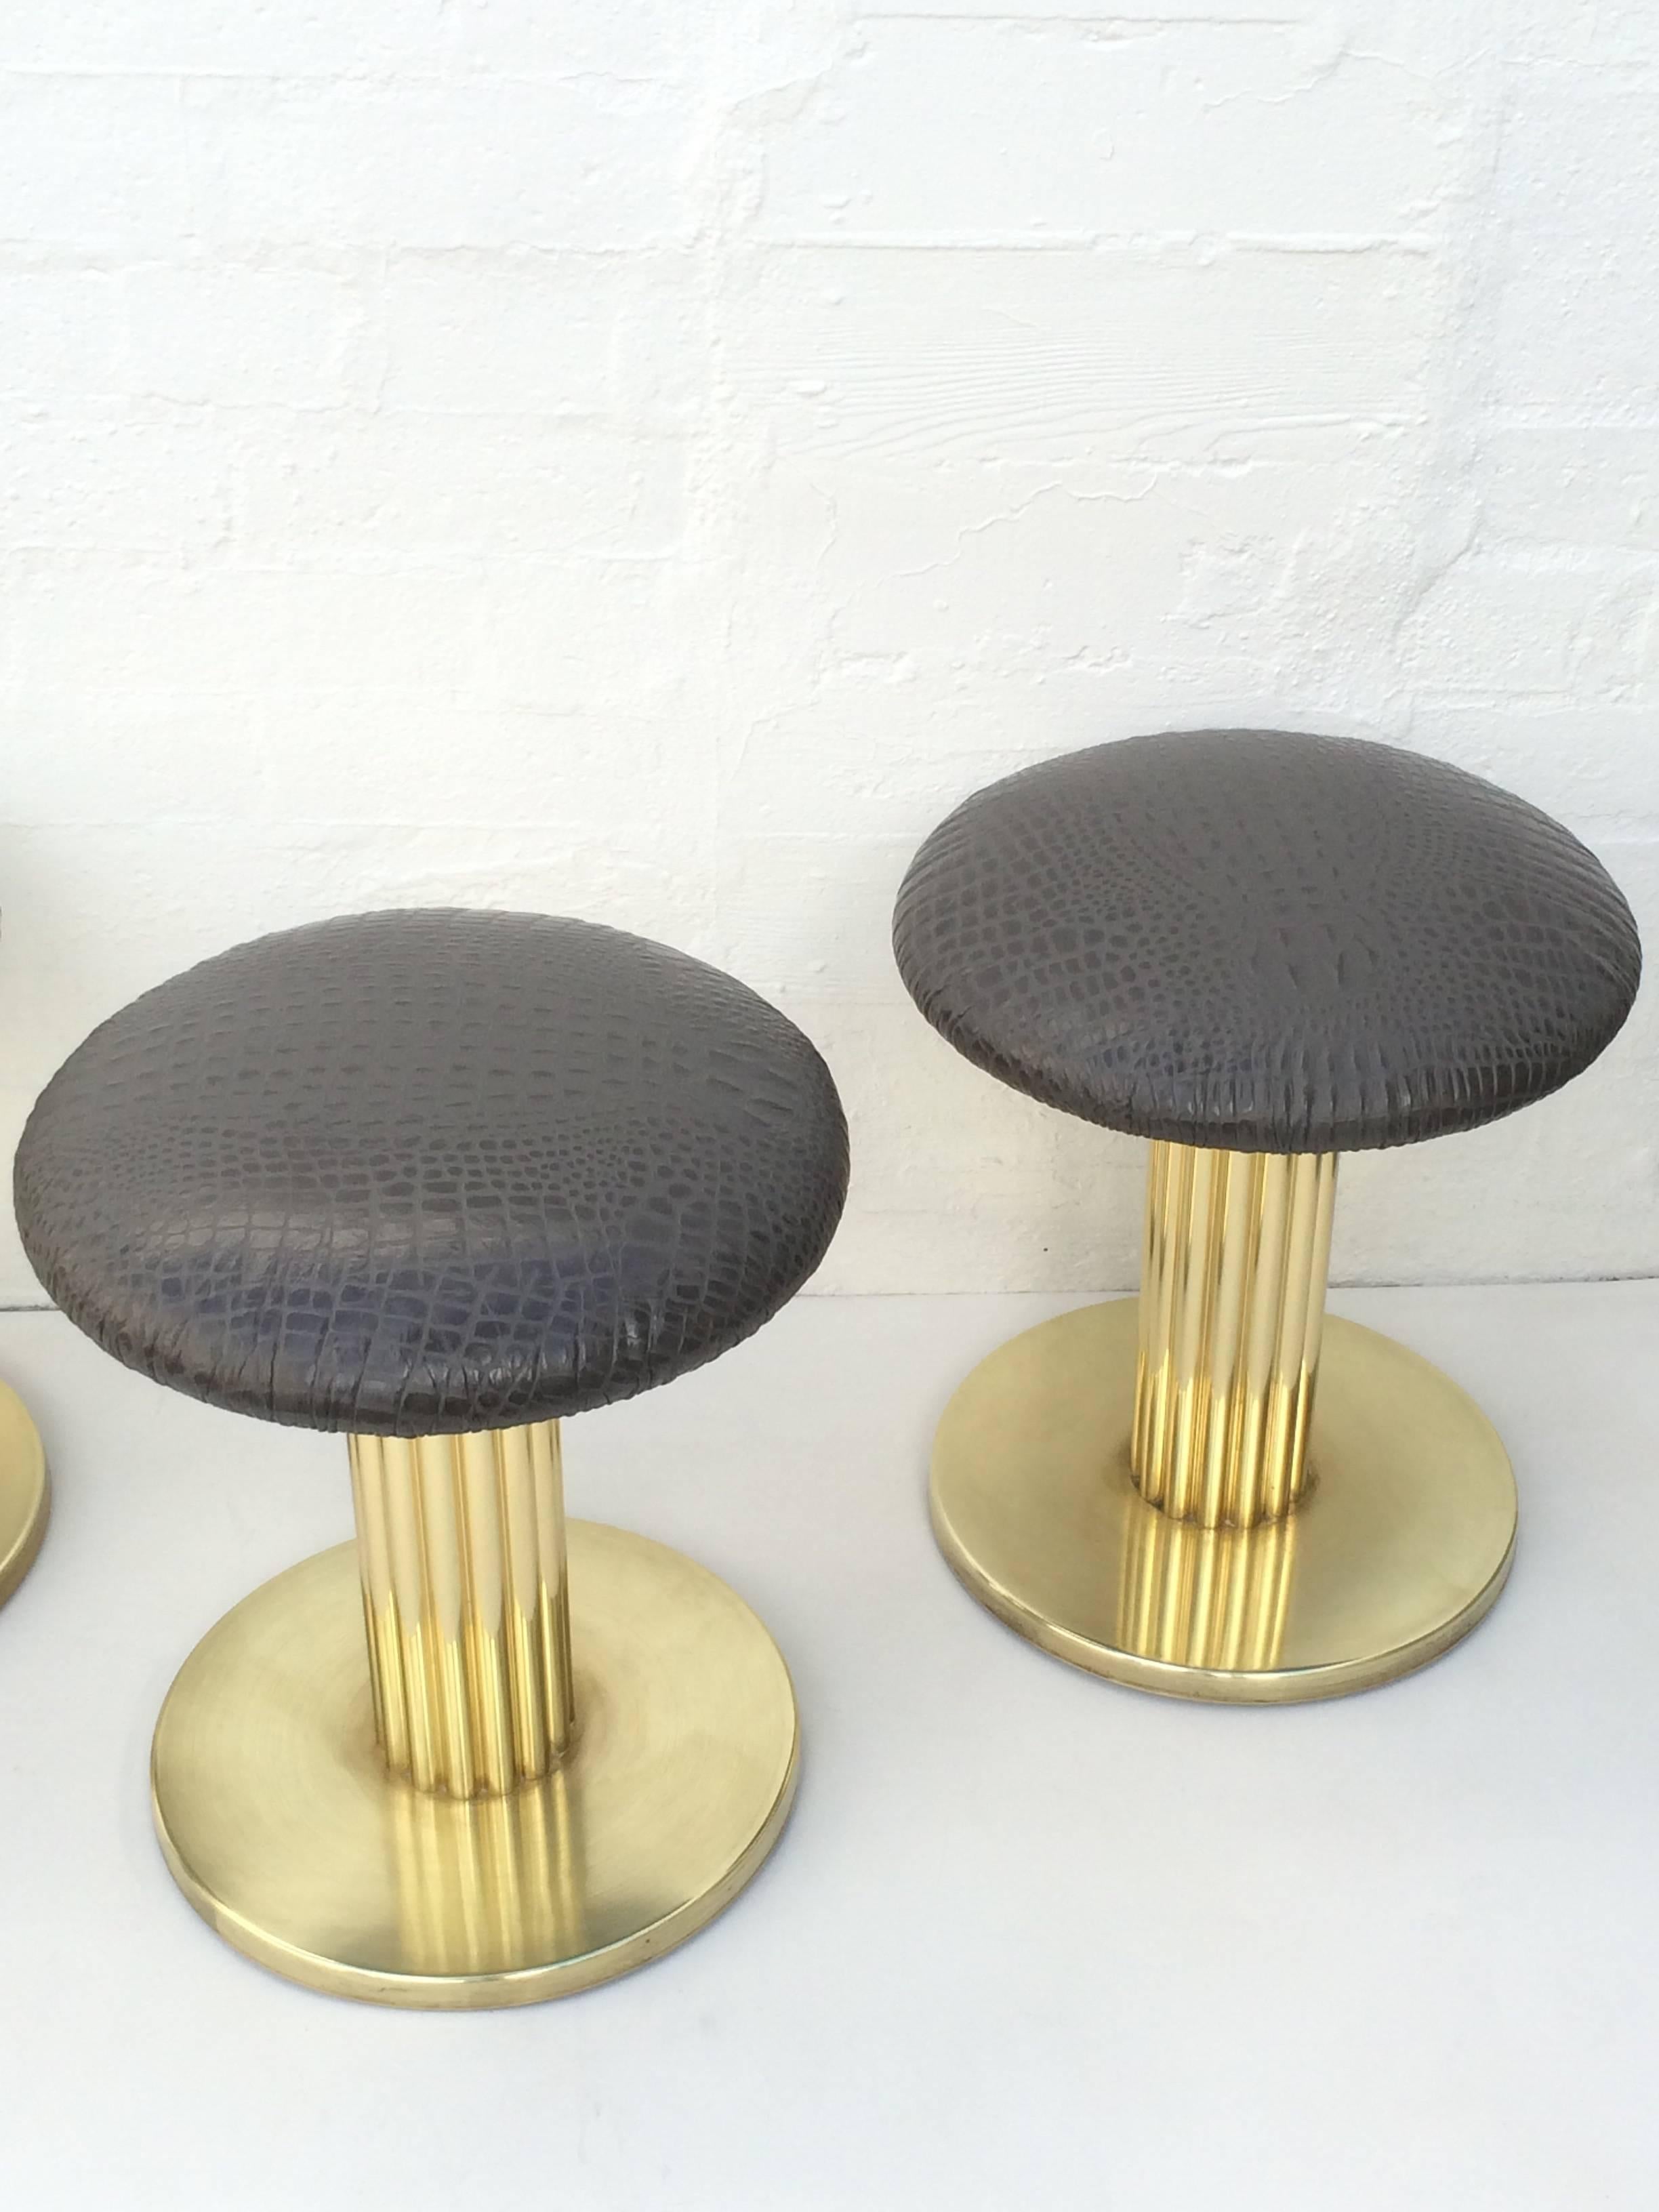 Brass and Leather Swivel Stools by Design for Leisure Ltd 2